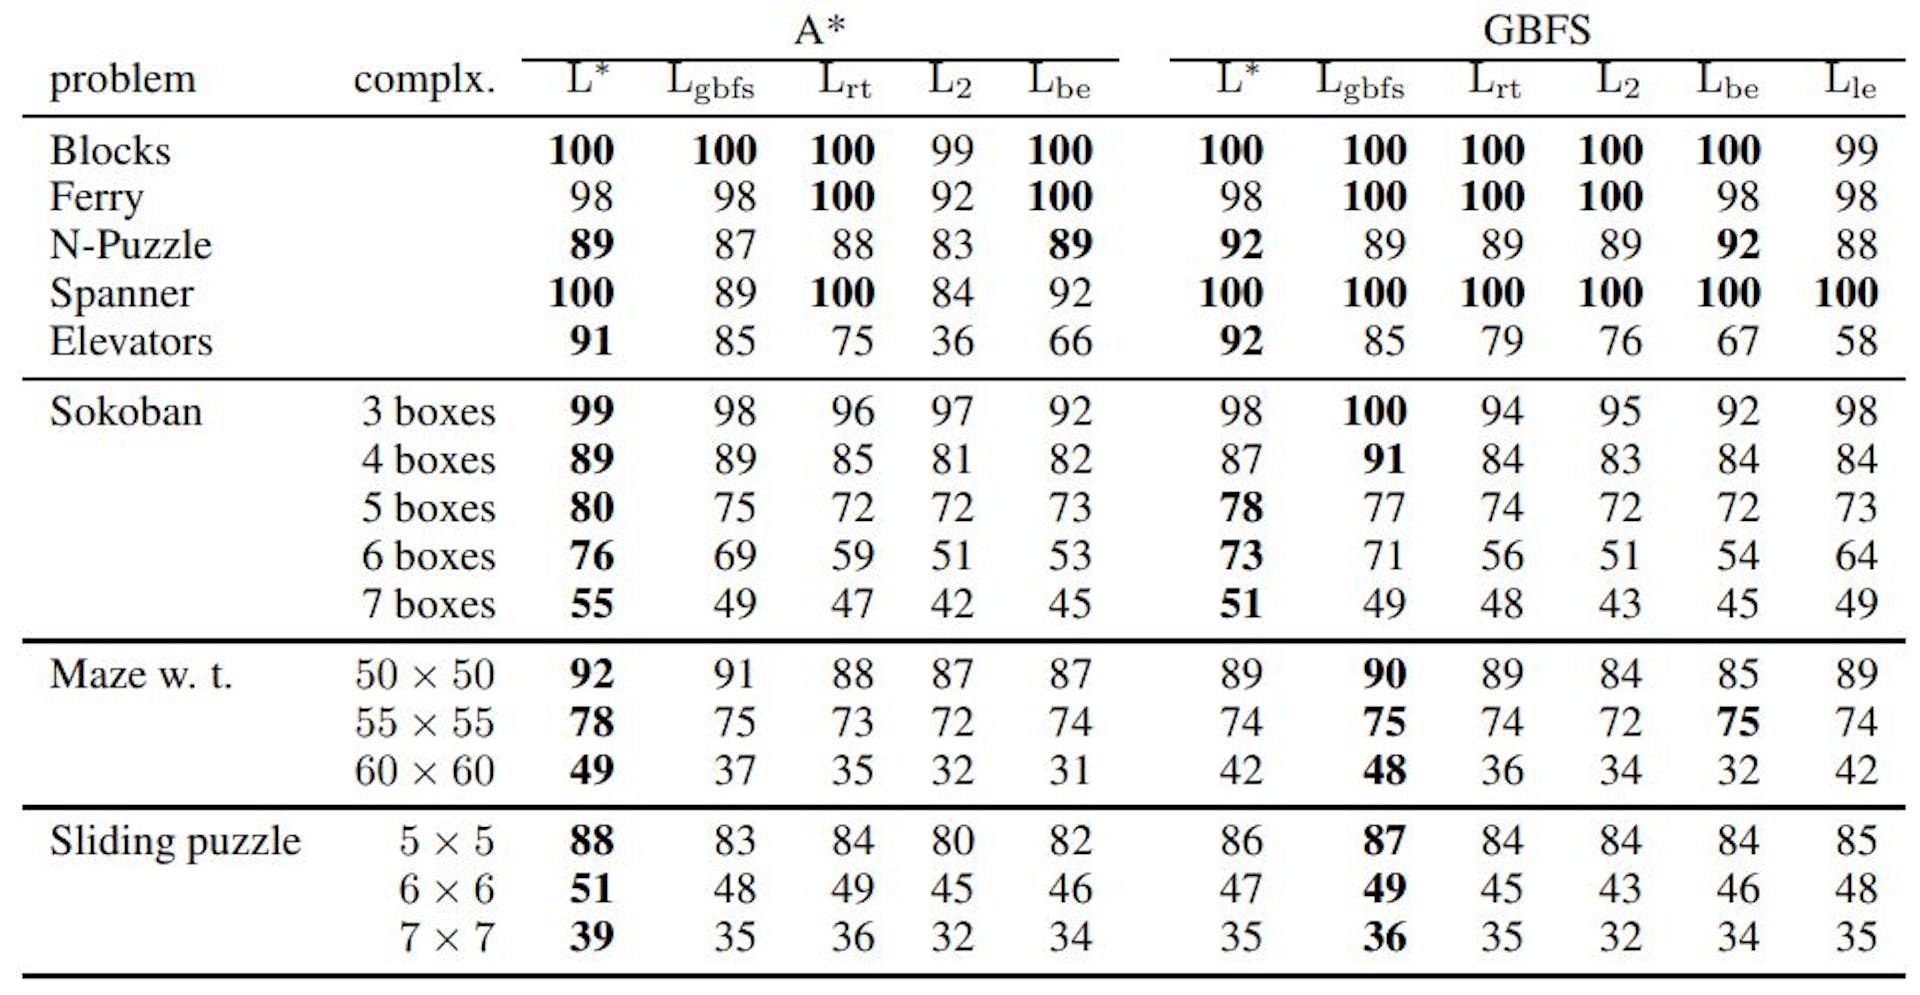 Table 1: Fraction of solved problem instances in percent from the testing set. The top row denotes the type of the search and the second top row denotes the loss function against which the heuristic function was optimized. The complexity is explicitly shown for grid domains. Standard deviations are most of the times smaller than one percent and are provided in Table in the Appendix.